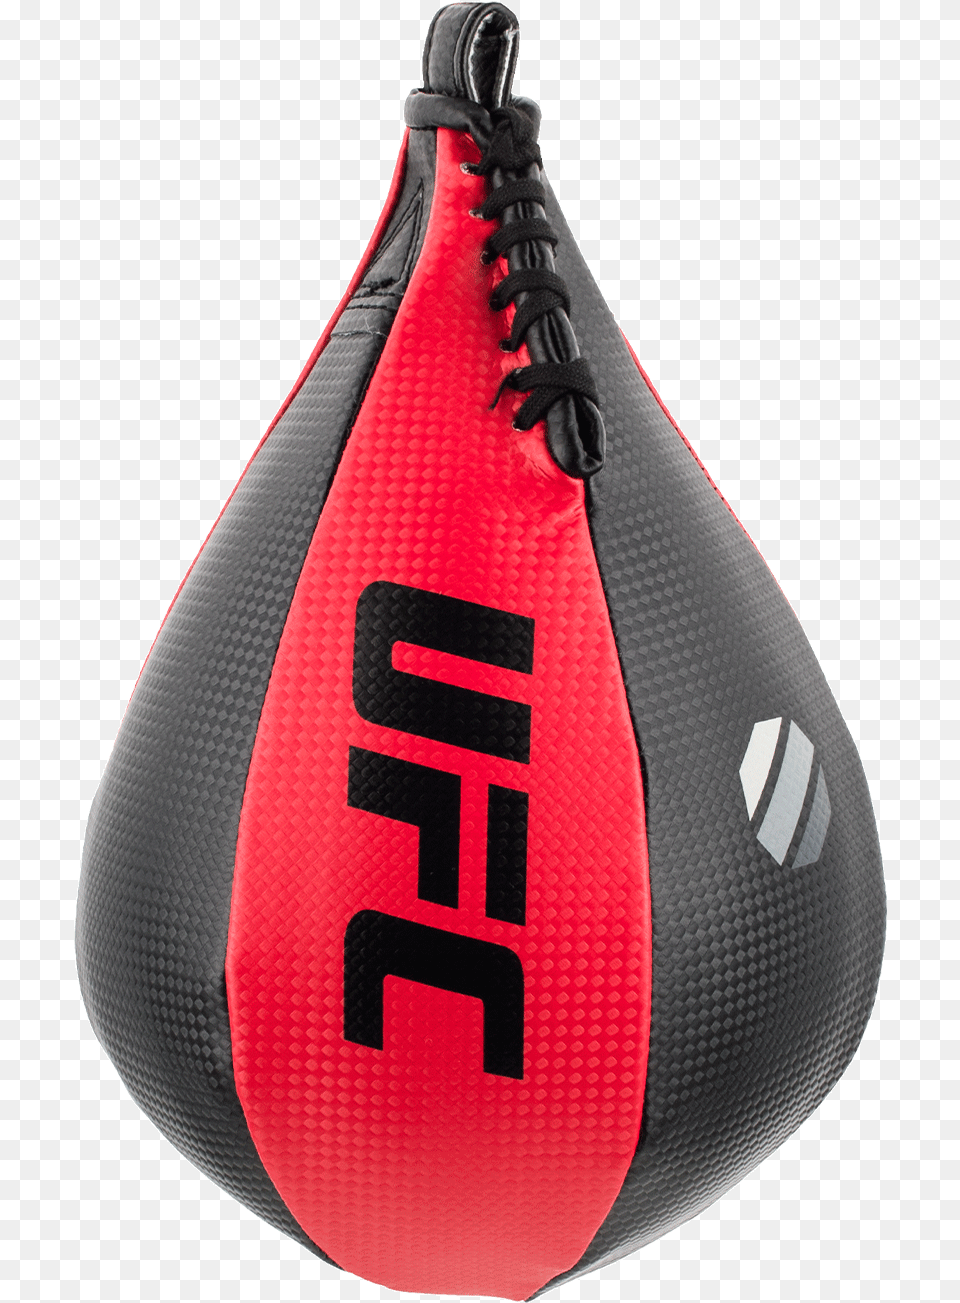 Ufc Leather Speed Striking Ball Ufc Speed Ball Png Image